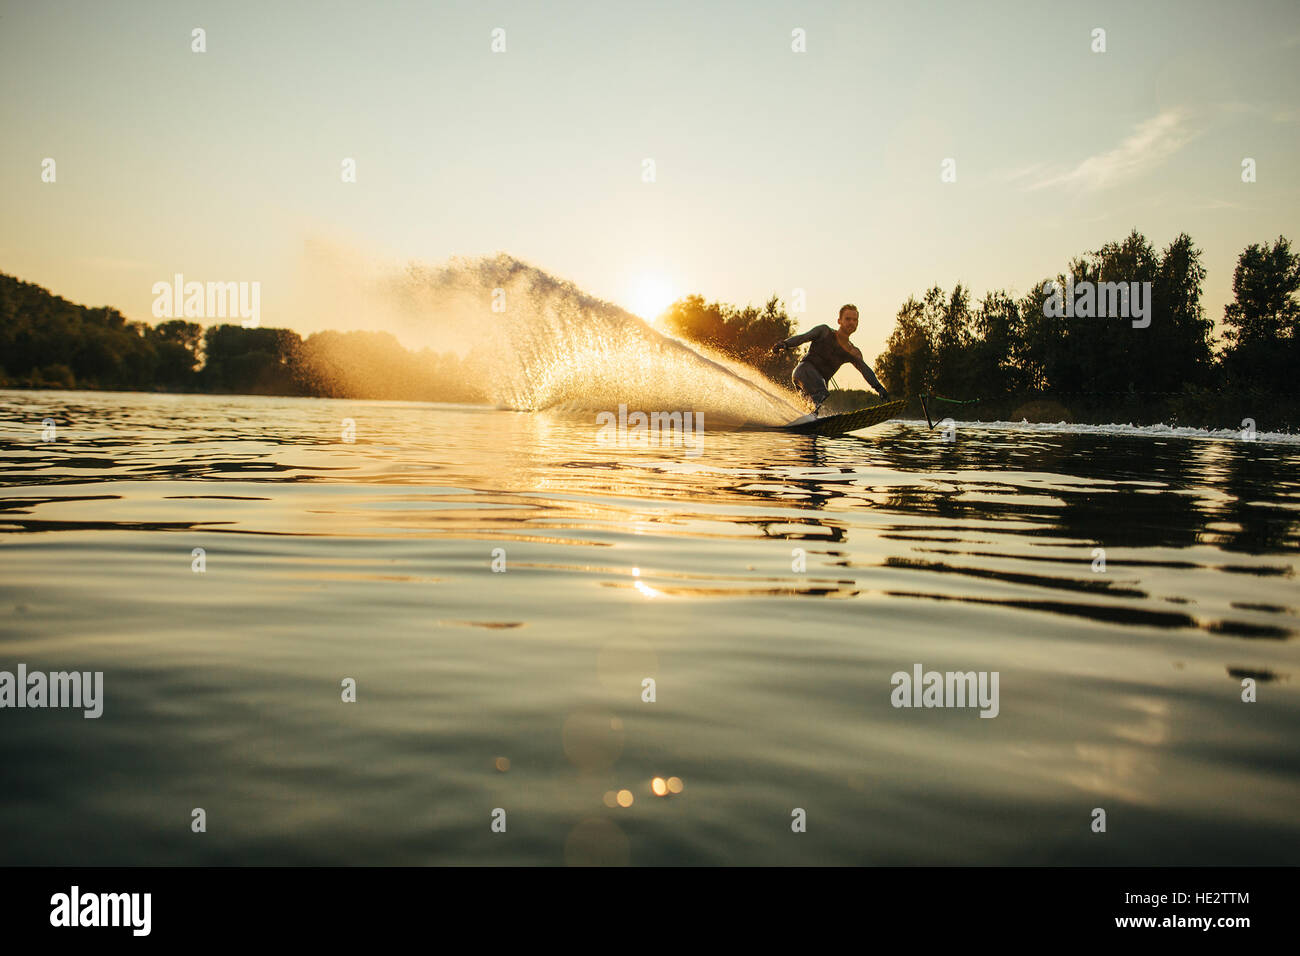 Wakeboarder moving fast in splashes of water at sunset. Man water skiing on a lake. Stock Photo